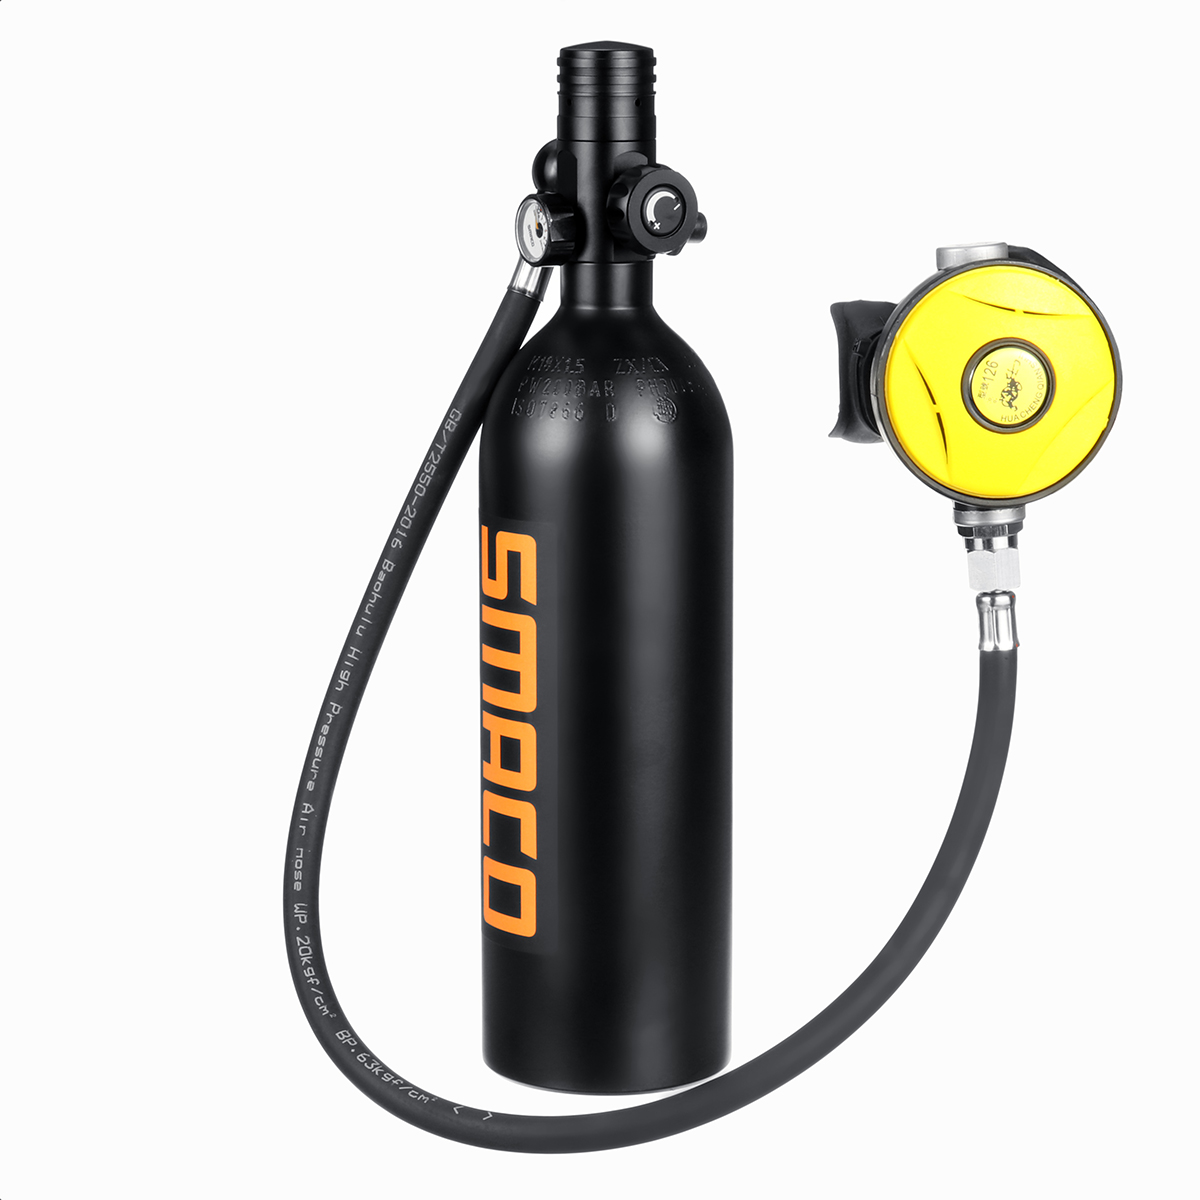 

SMACO 1L Scuba Oxygen Diving Equipement Cylinder Air Tank Underwater Breathing Valve Set